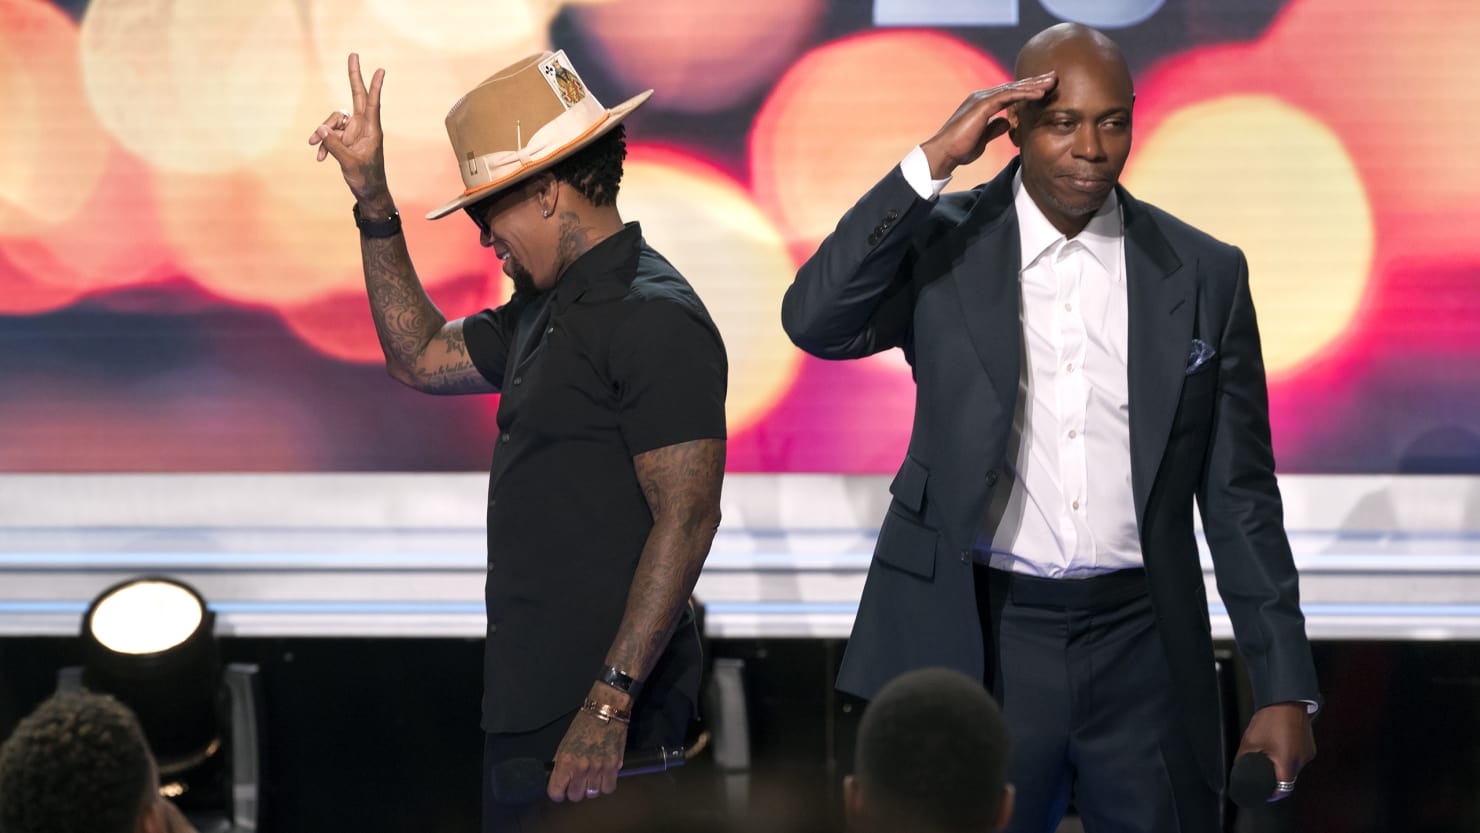 Dave Chappelle and DL Hughley ROAST Each Other On STAGE?!?!